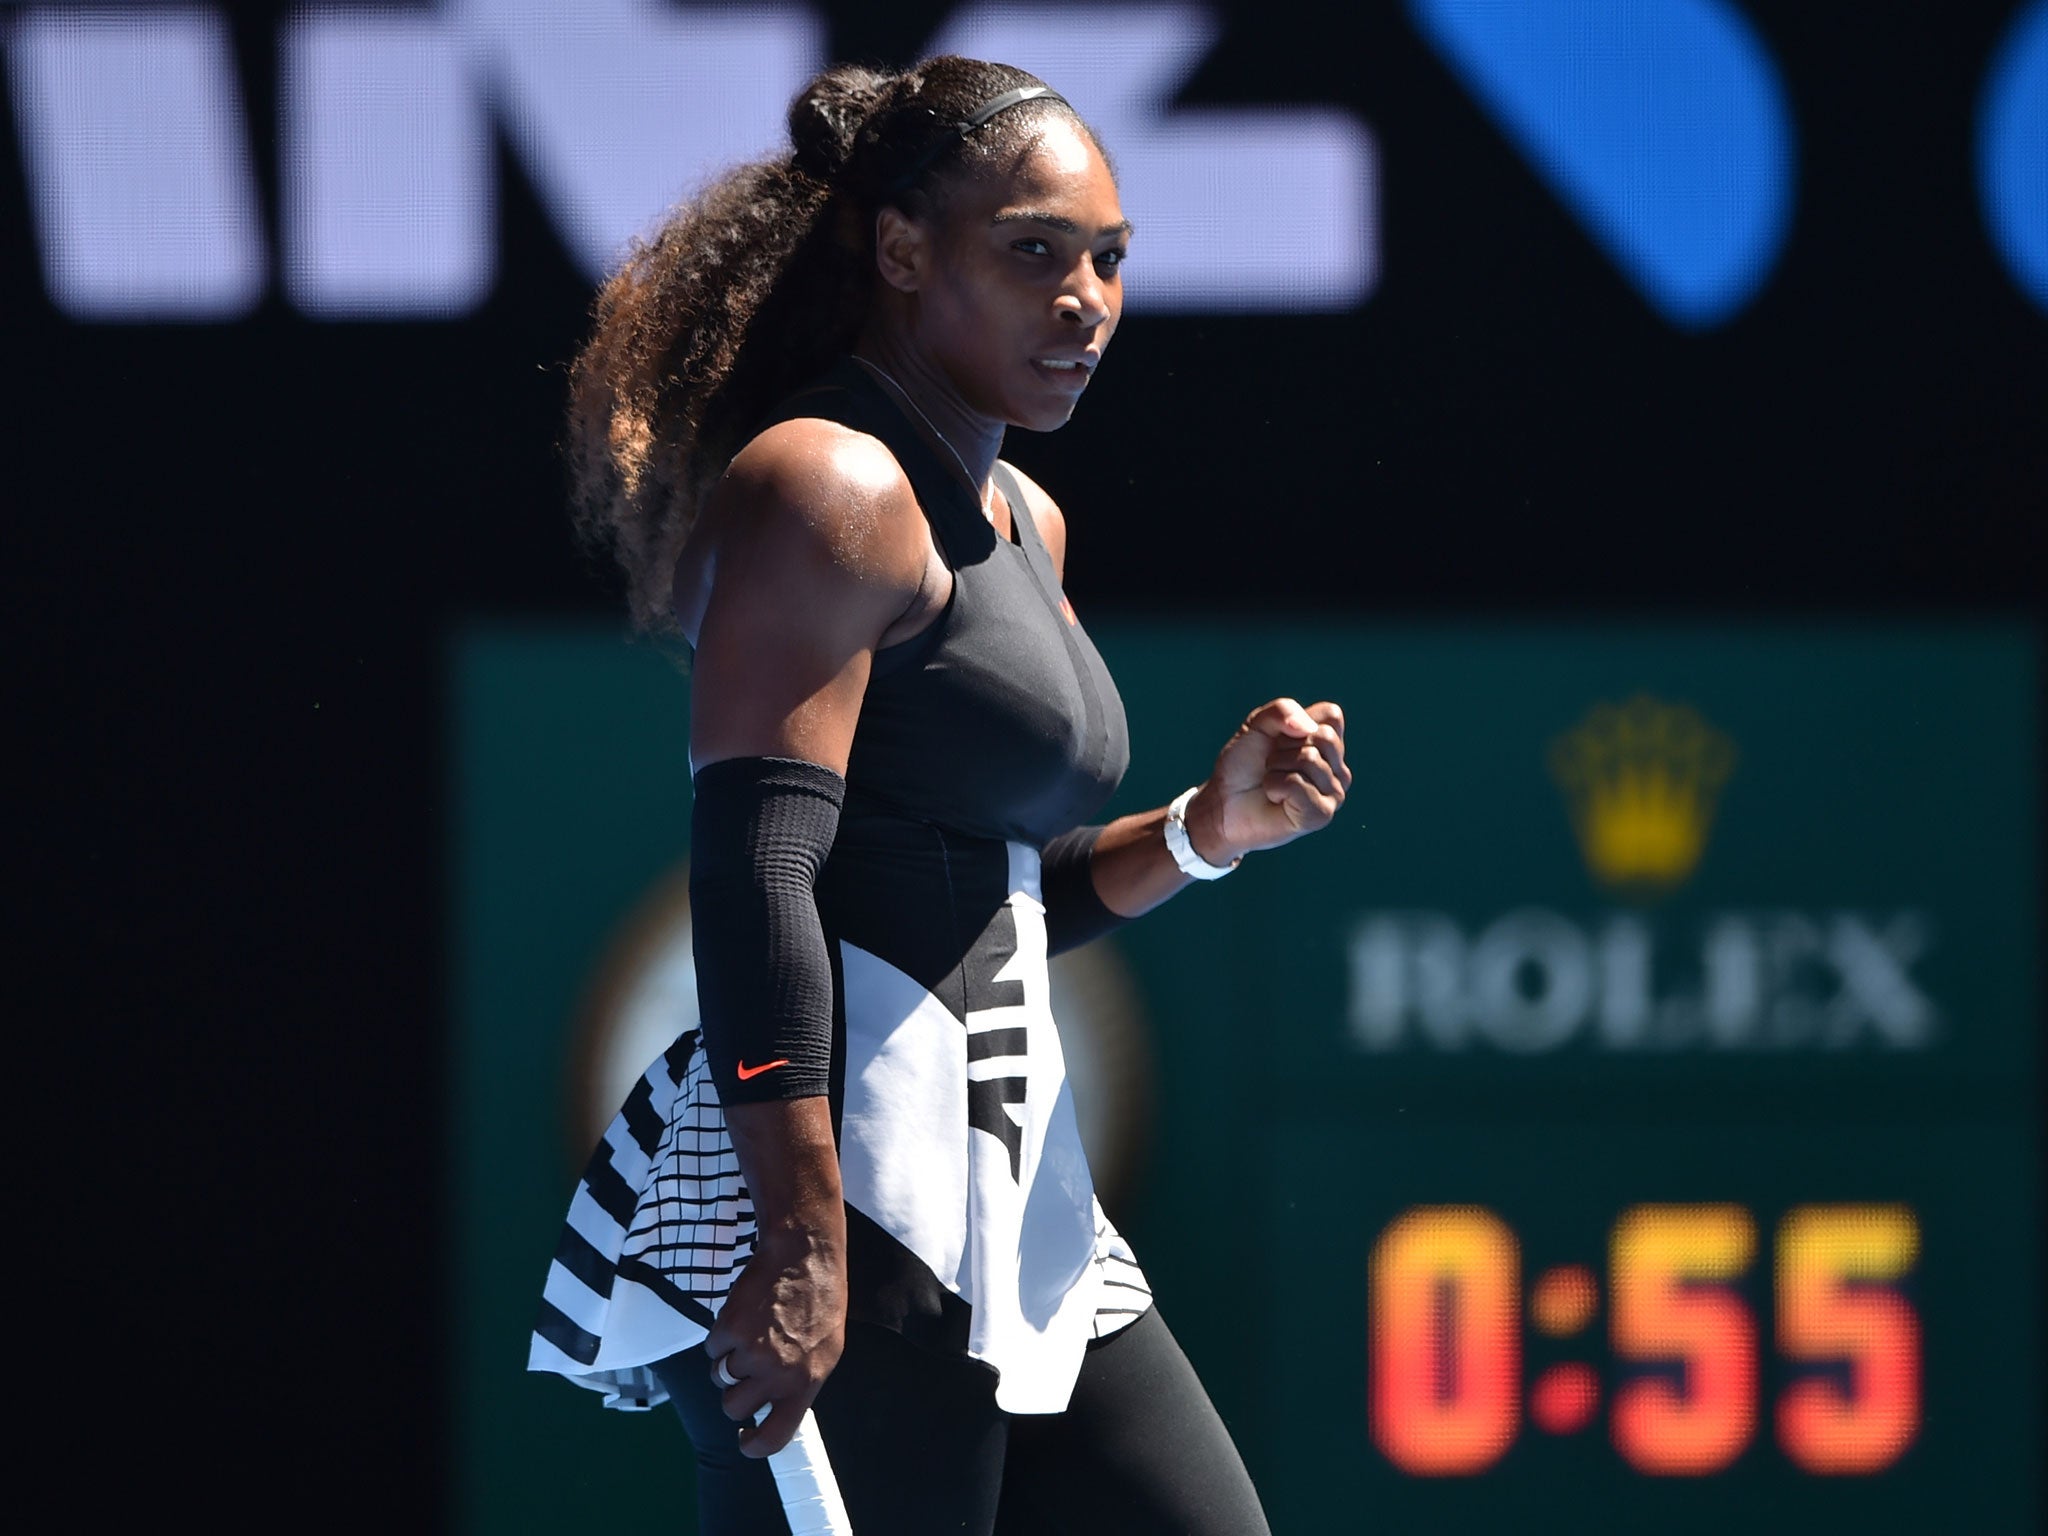 Serena Williams looked back to her bast in Melbourne